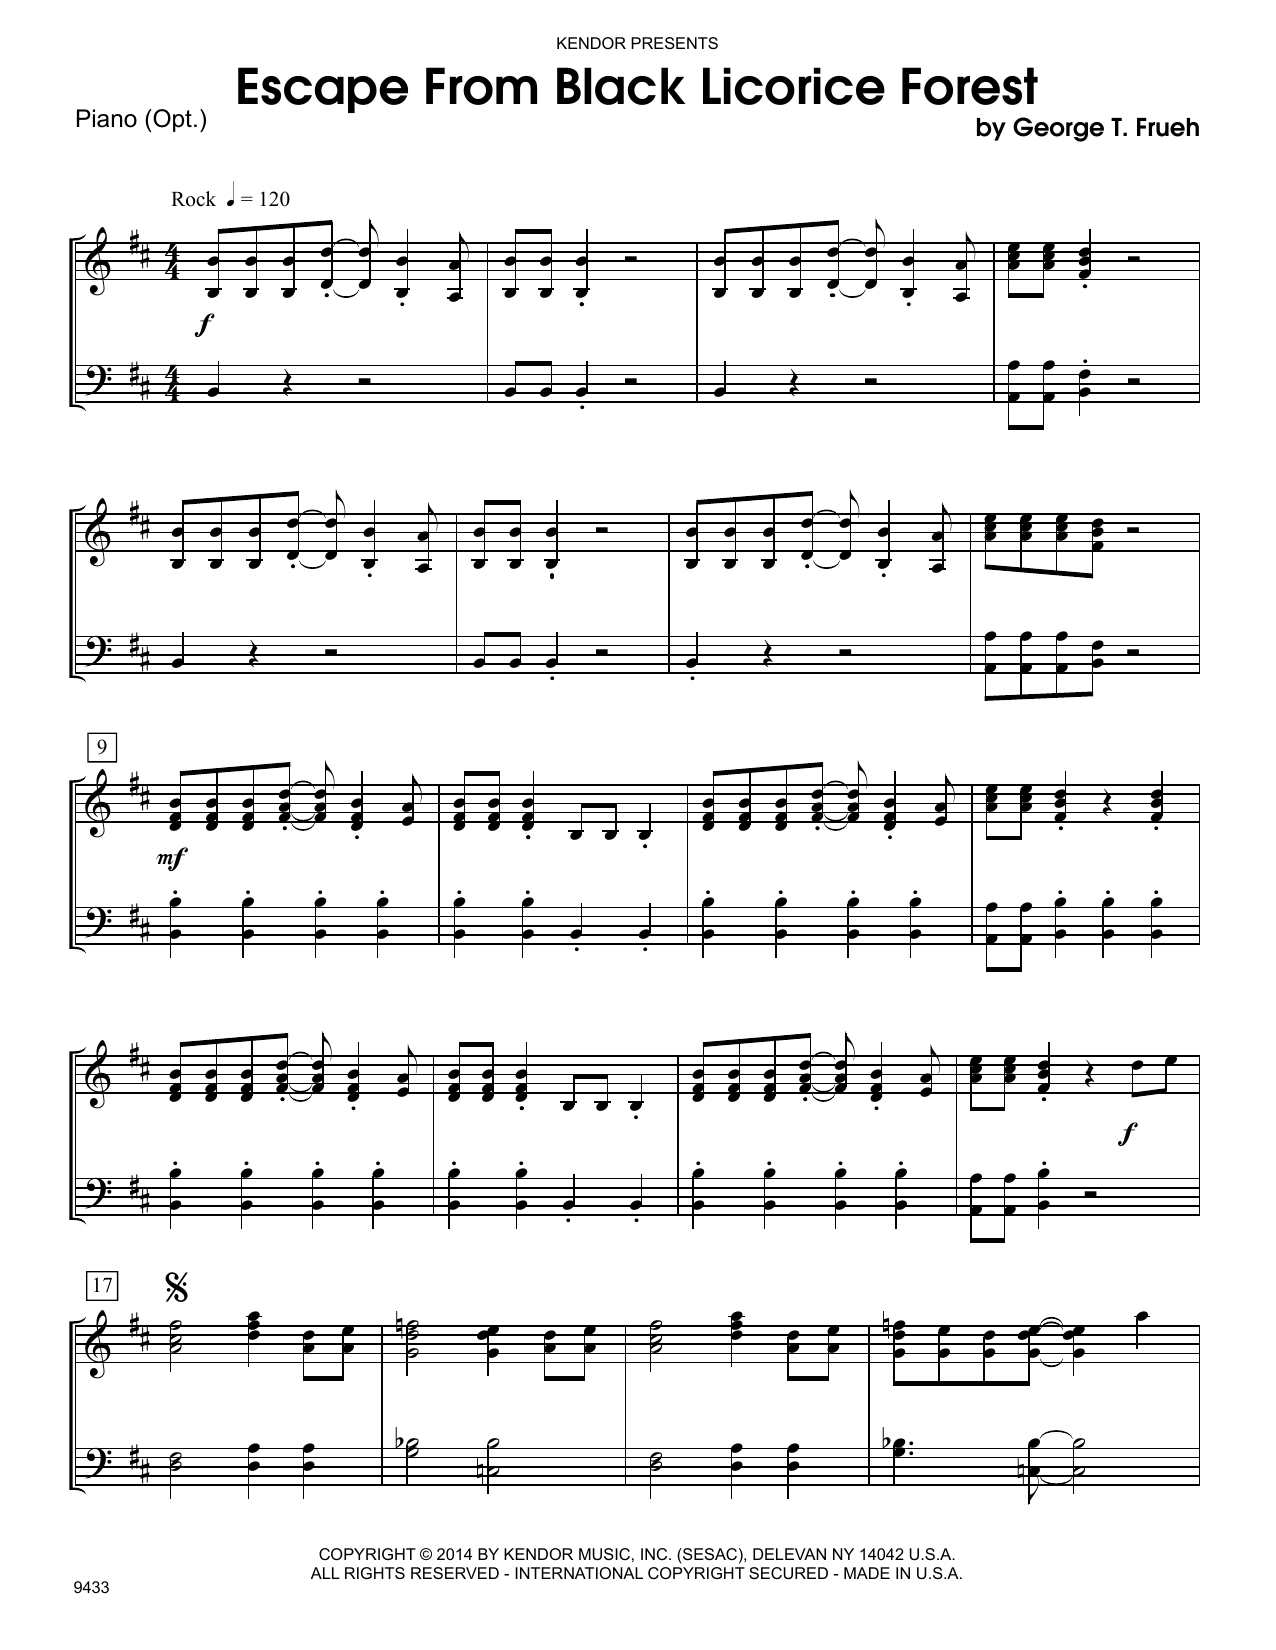 Download George T. Frueh Escape From Black Licorice Forest - Pia Sheet Music